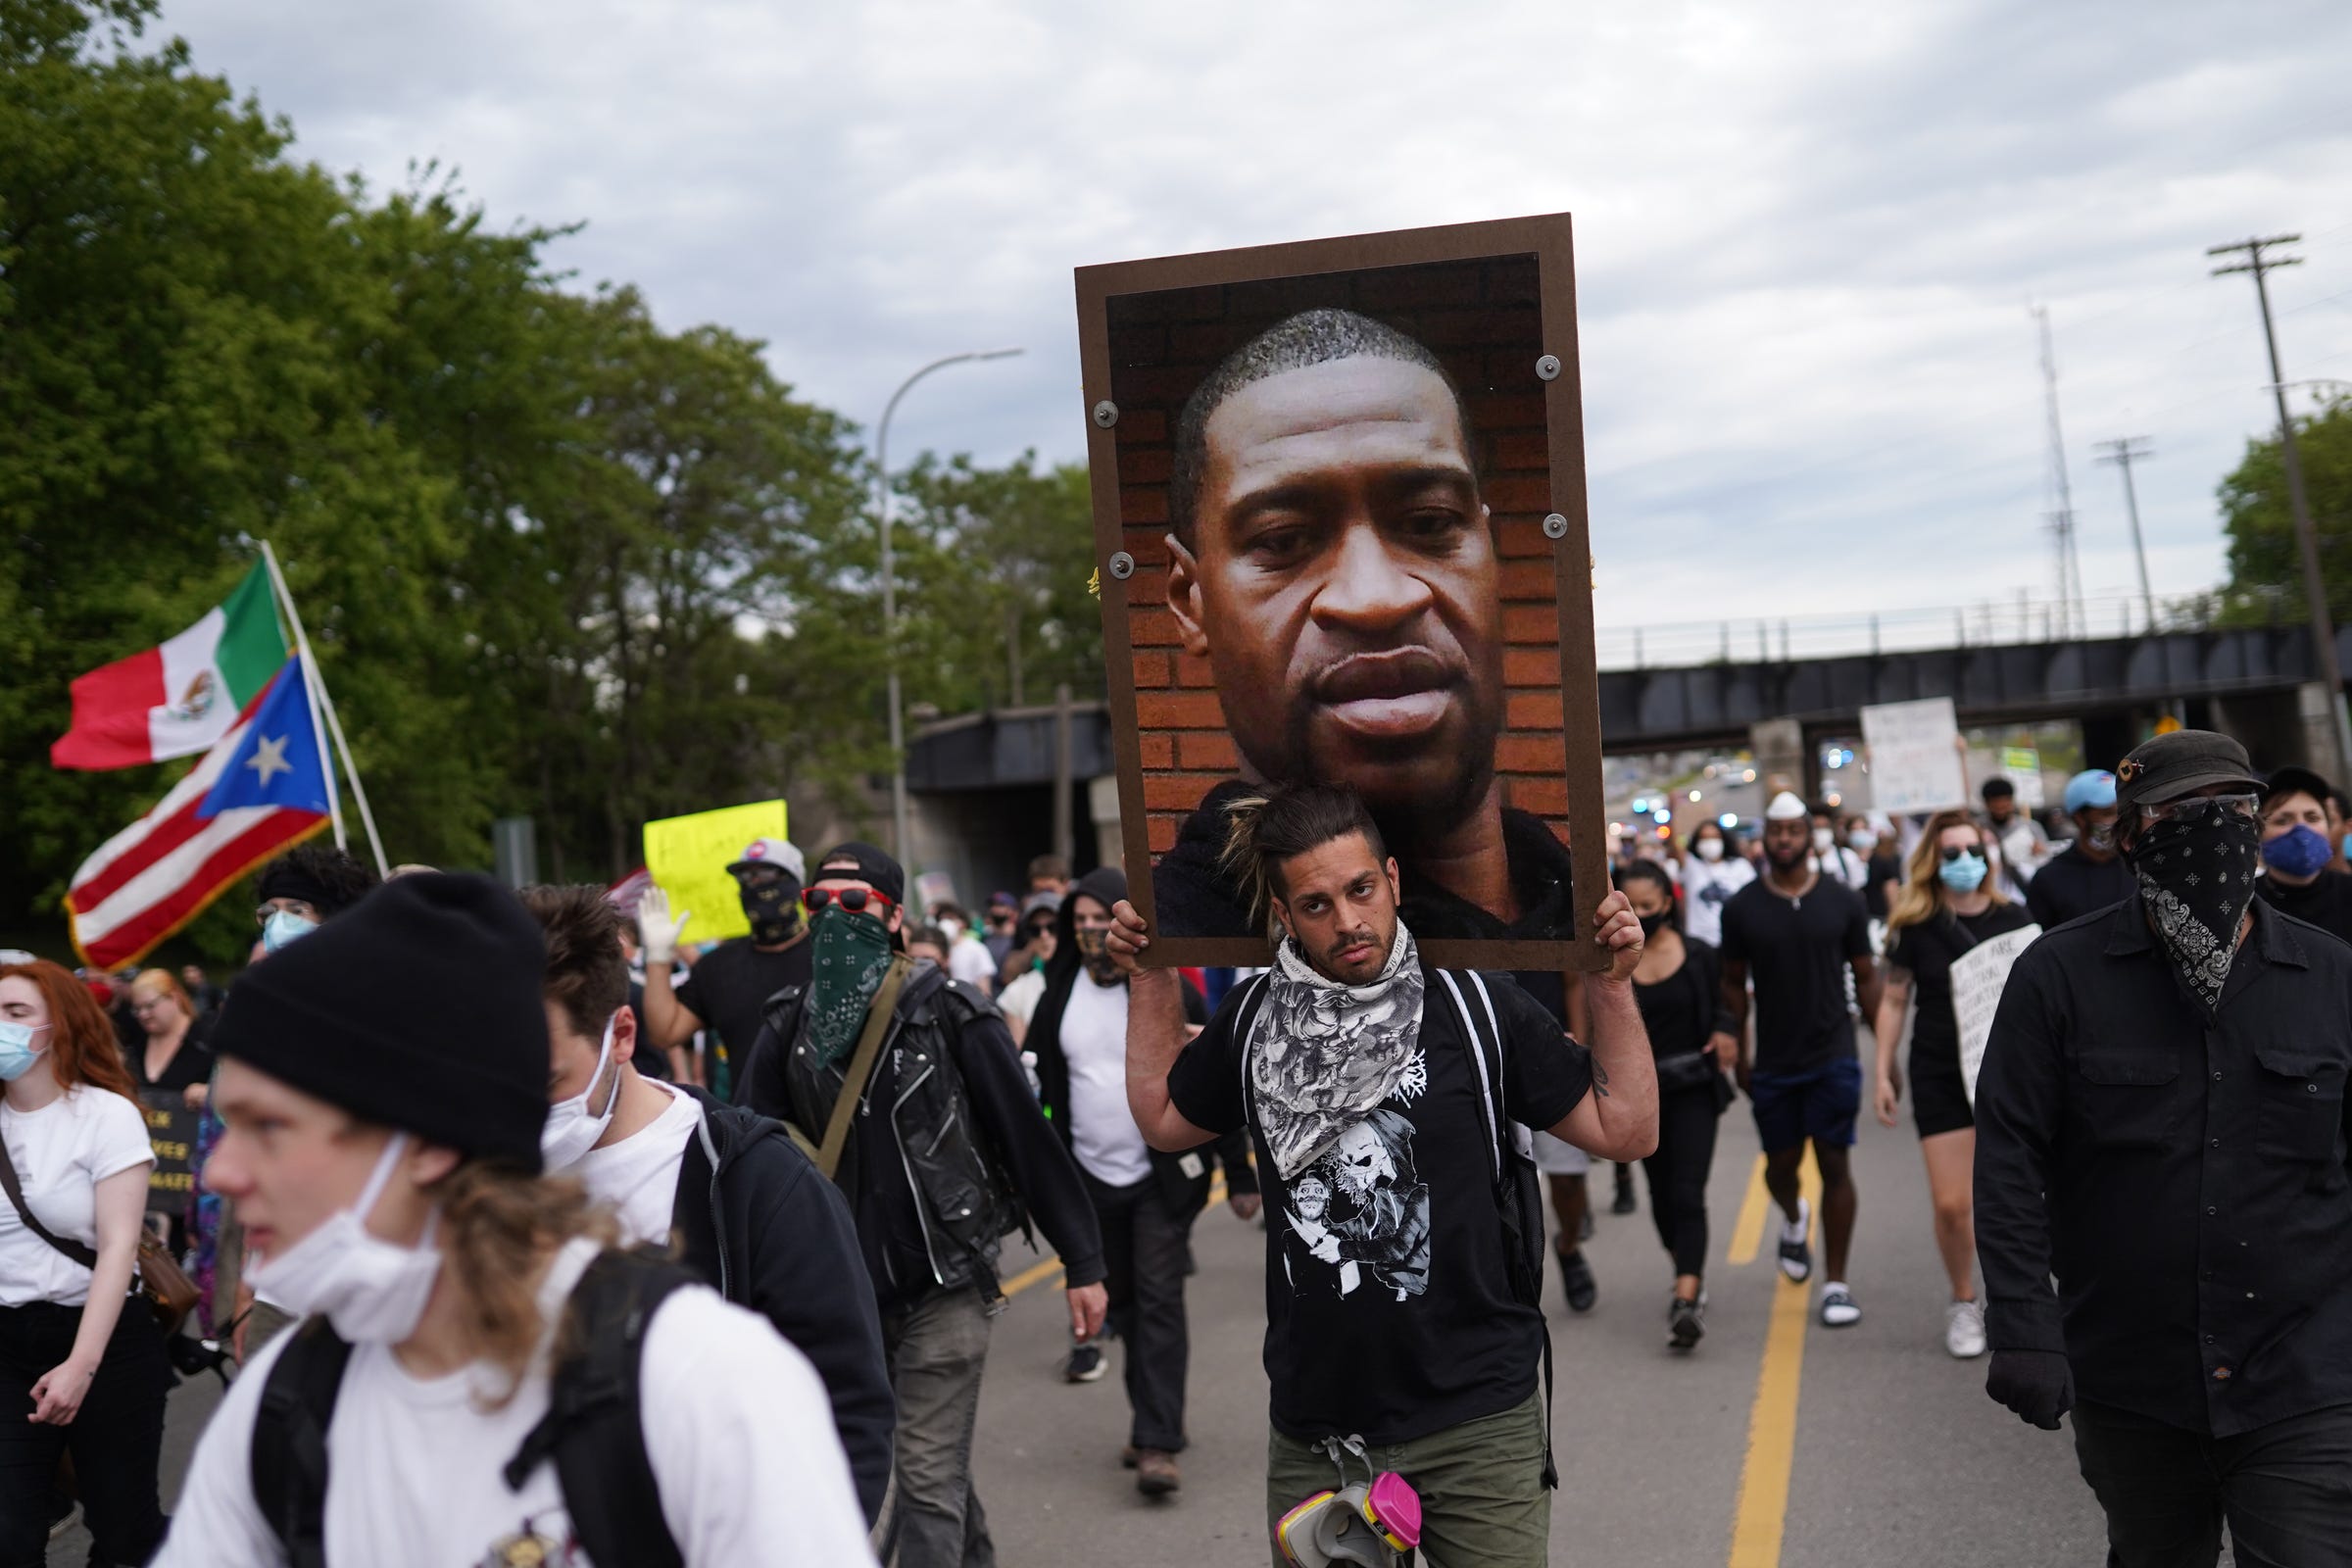 Protesters walk through Detroit on Monday, June 1, 2020 for the fourth day of protesting in the city.